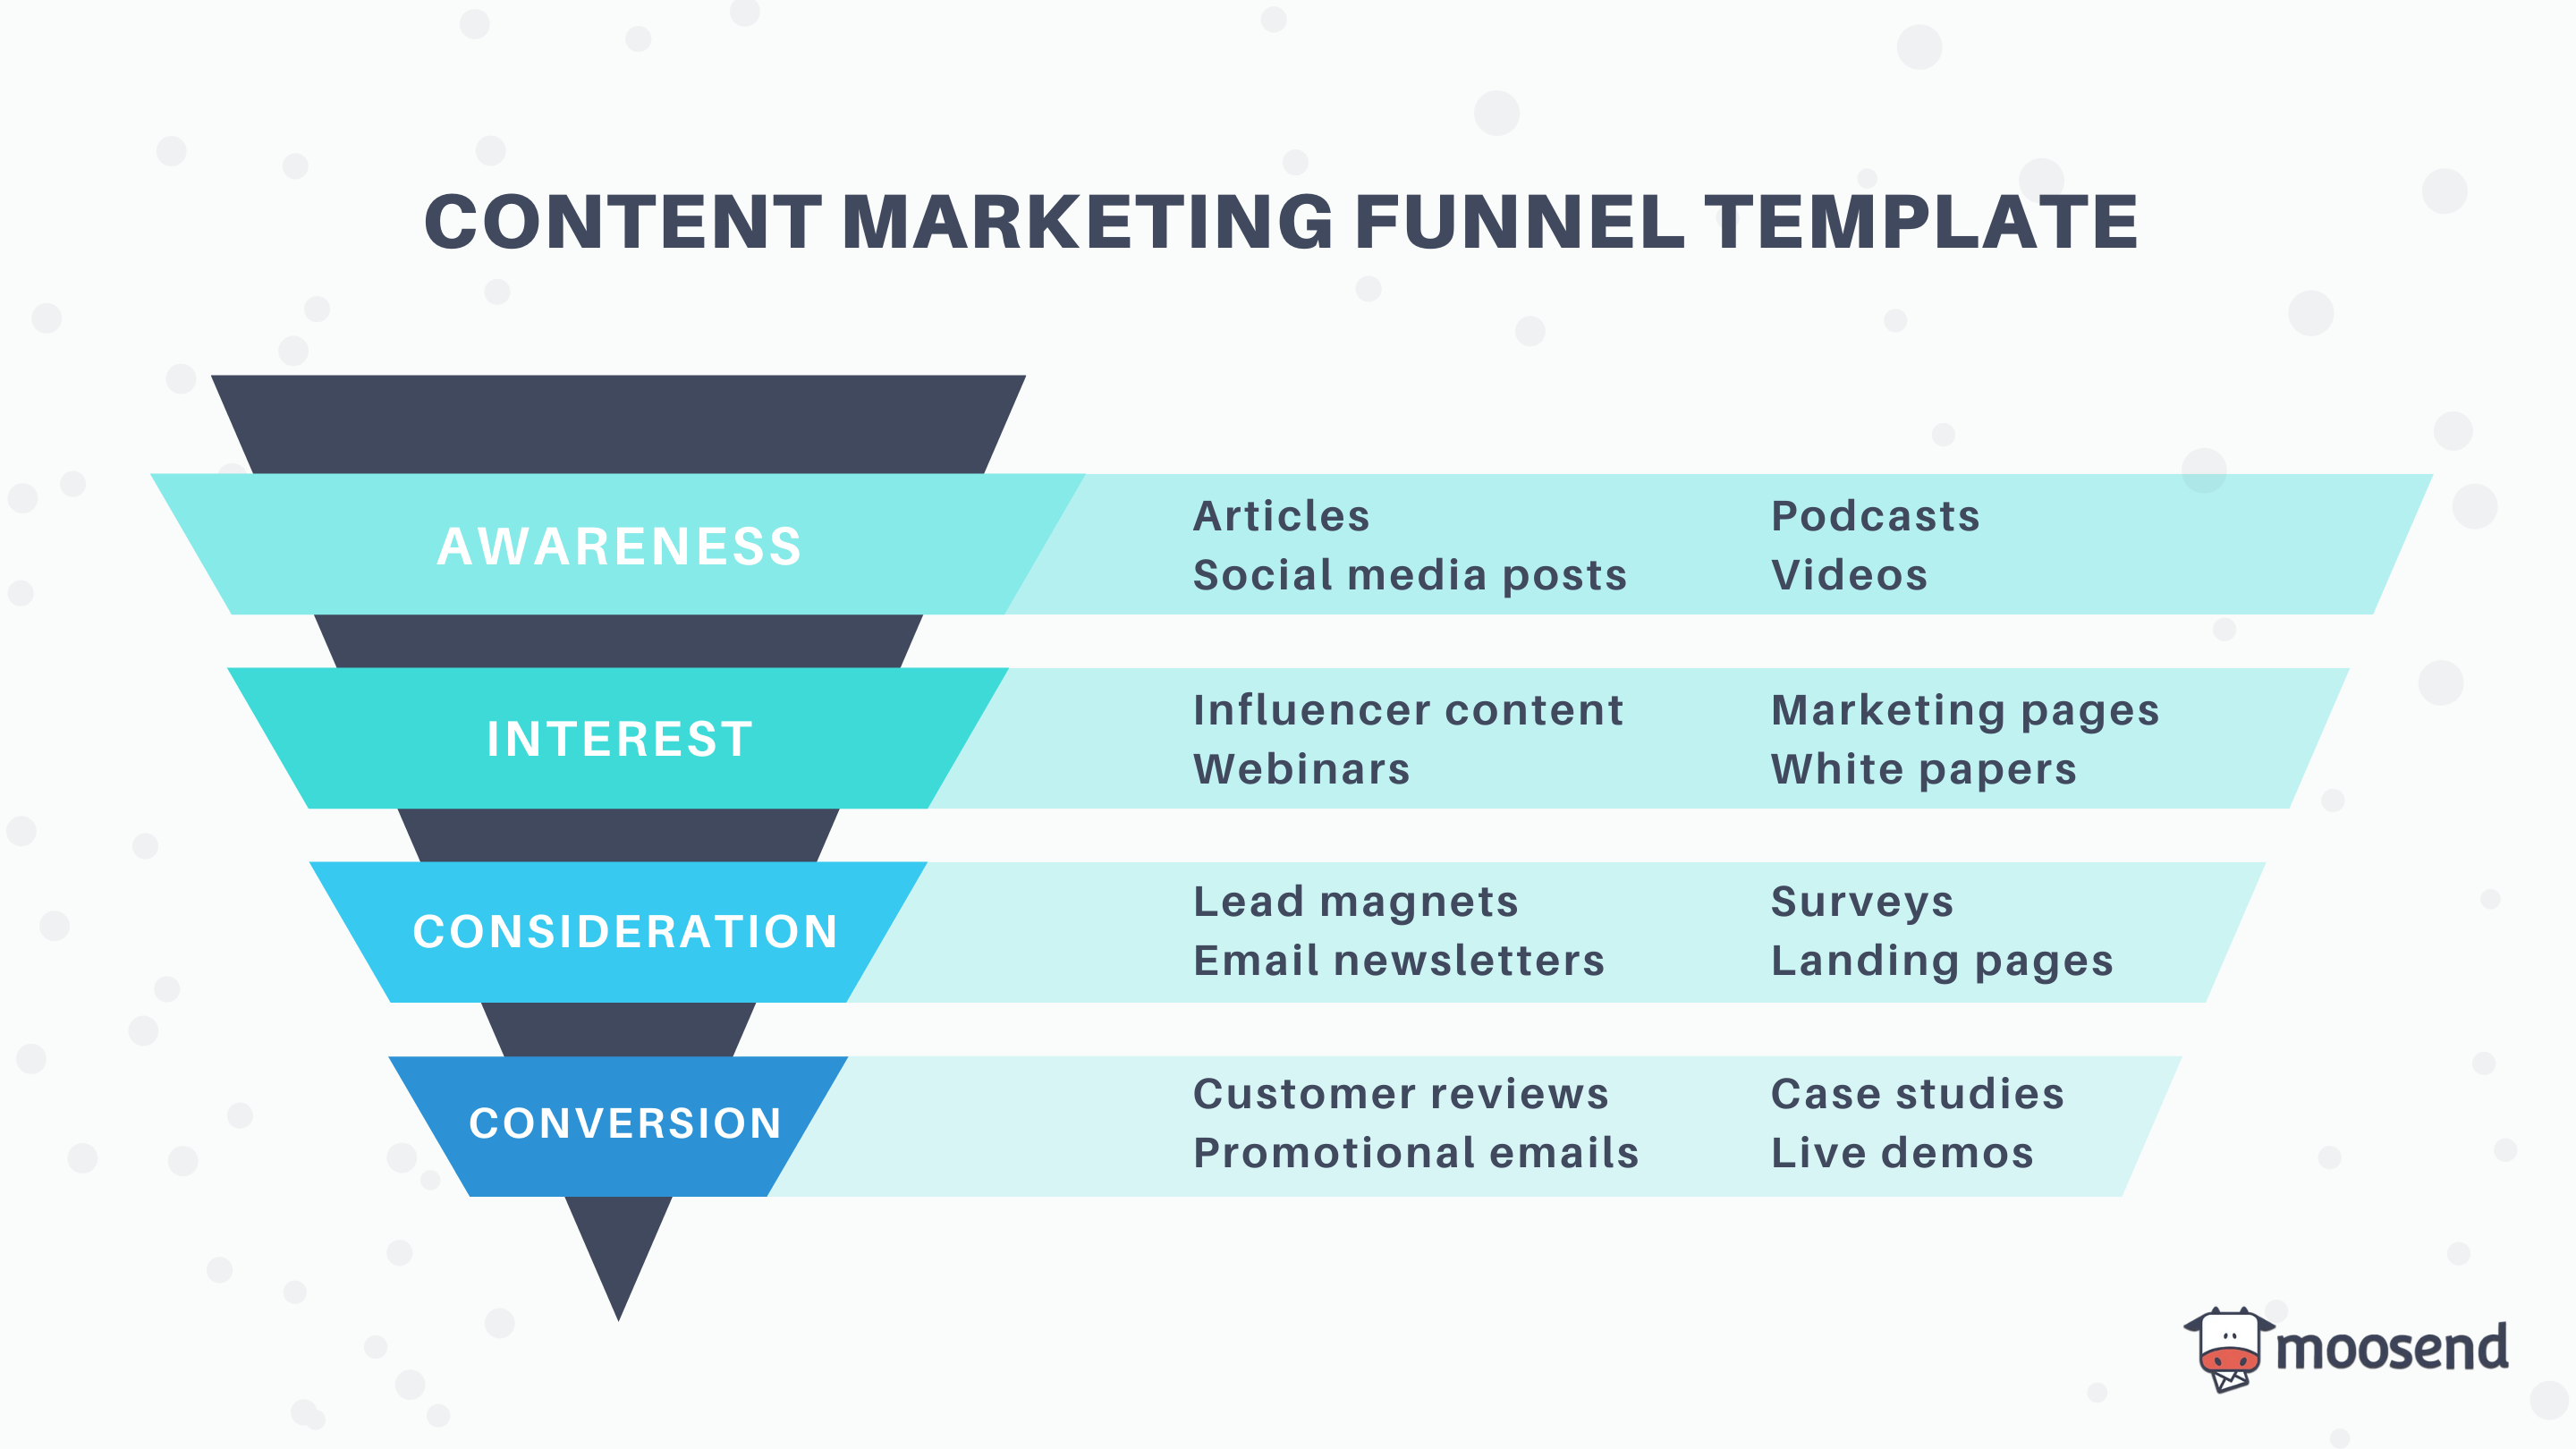 moosend content marketing funnel template